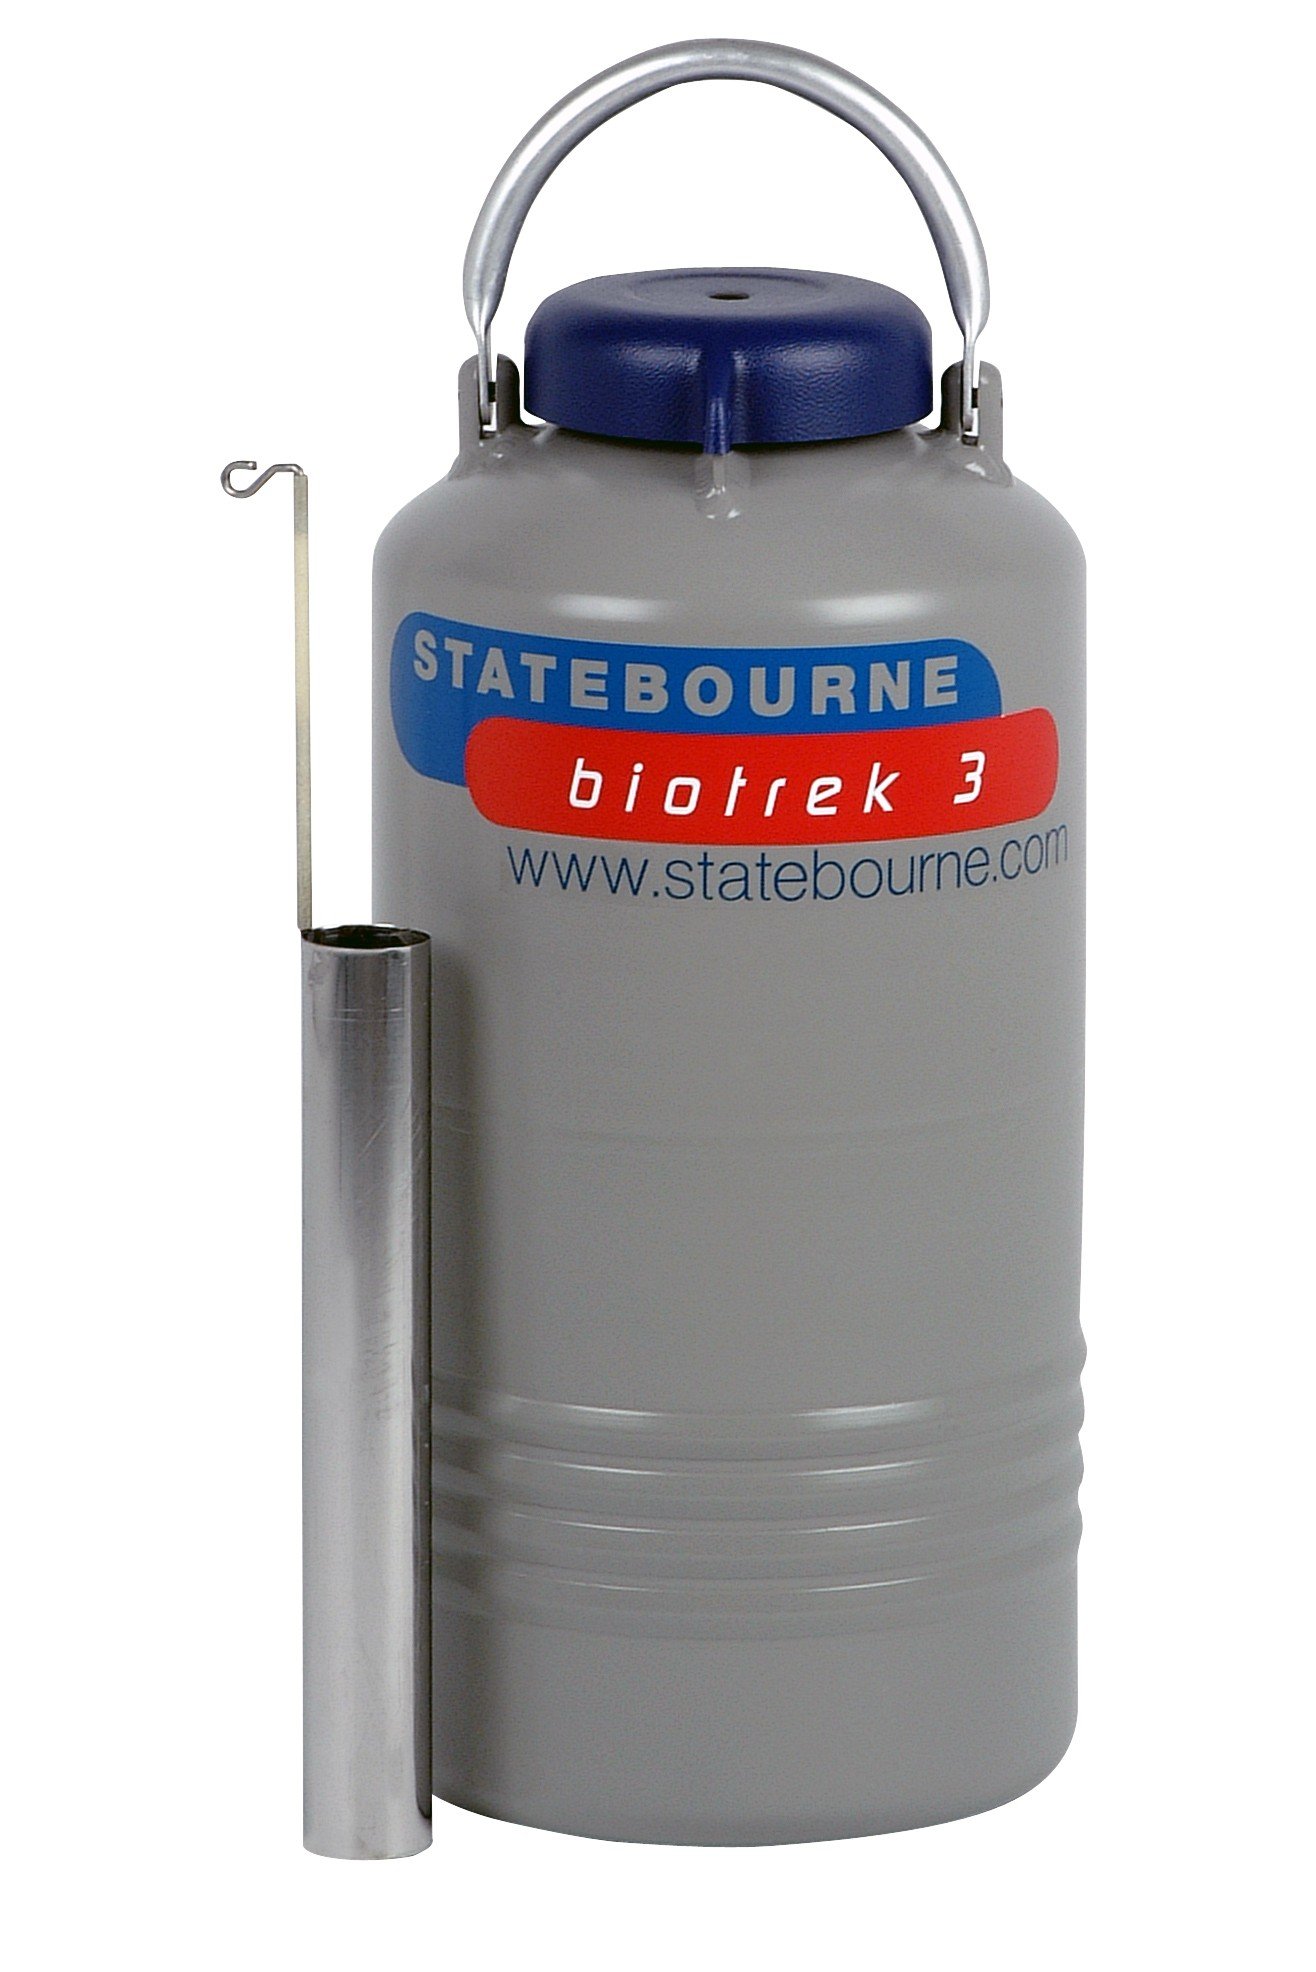 Statebourne Cryogenics 9903030 Biotrek 3 Portable Dry Shipping Container (includes single canister)